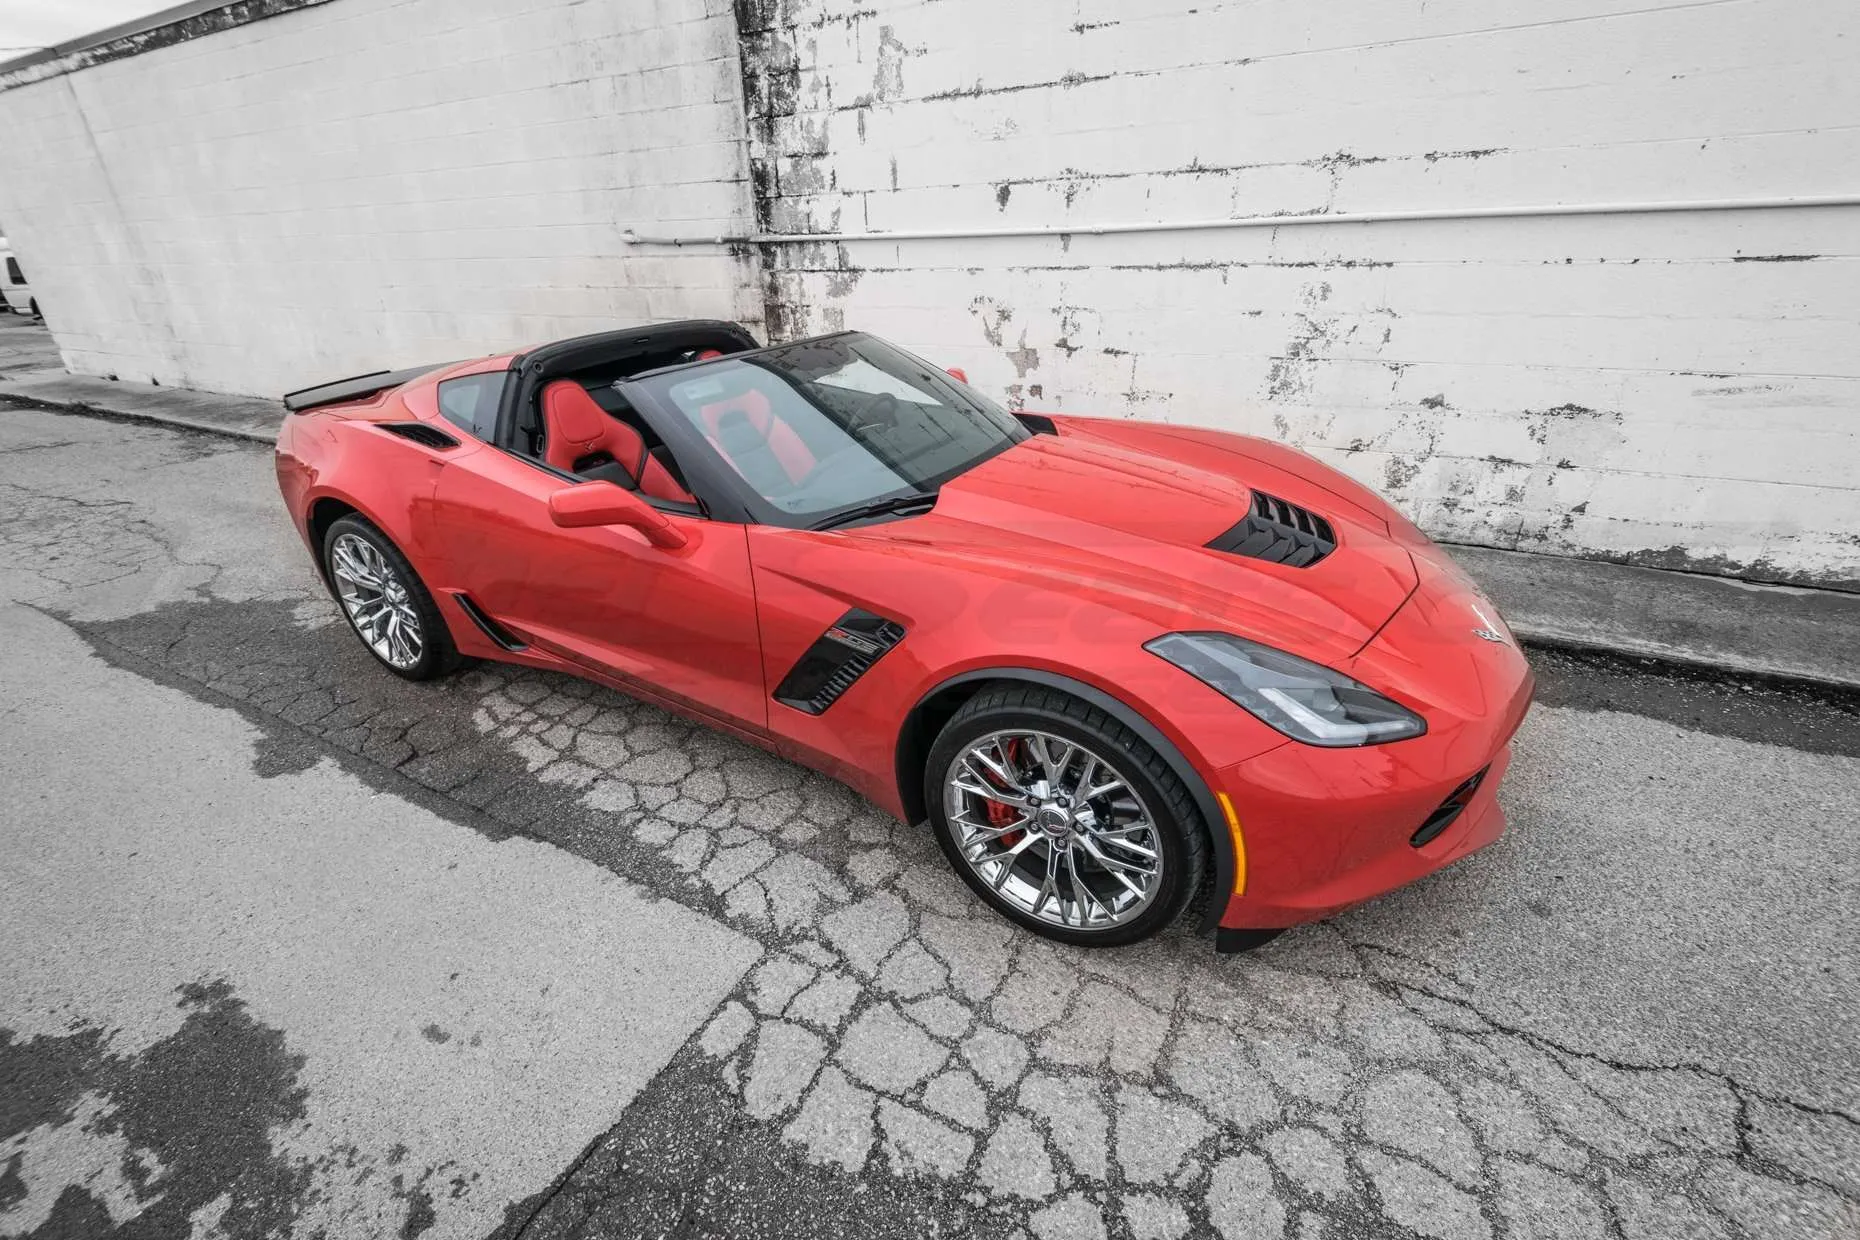 C7 Chevrolet Corvette with LeatherSeats.com installed seats